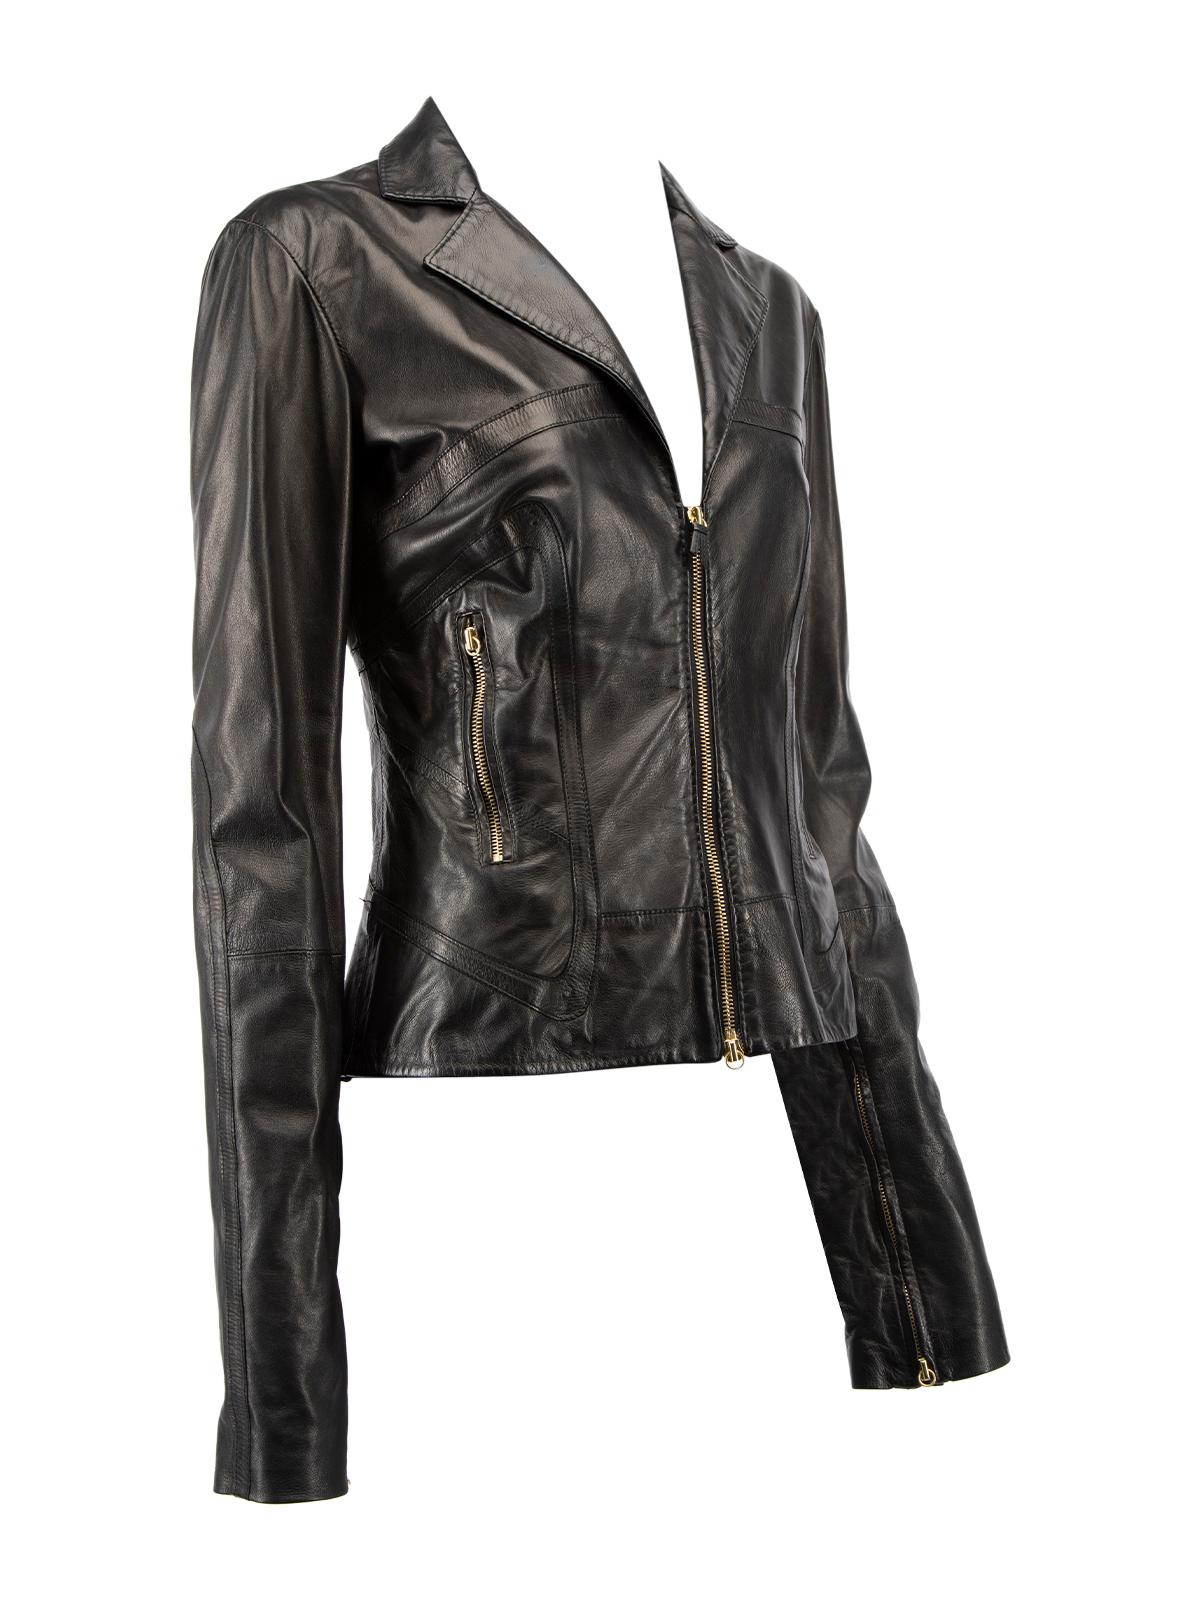 CONDITION is Very good. Hardly any visible wear to jacket is evident on this used Roberto Cavalli designer resale item. Details Black Leather Biker jacket Long sleeves Collared Front two way zip fastening Zips on cuffs Gold tone hardware Fully lined